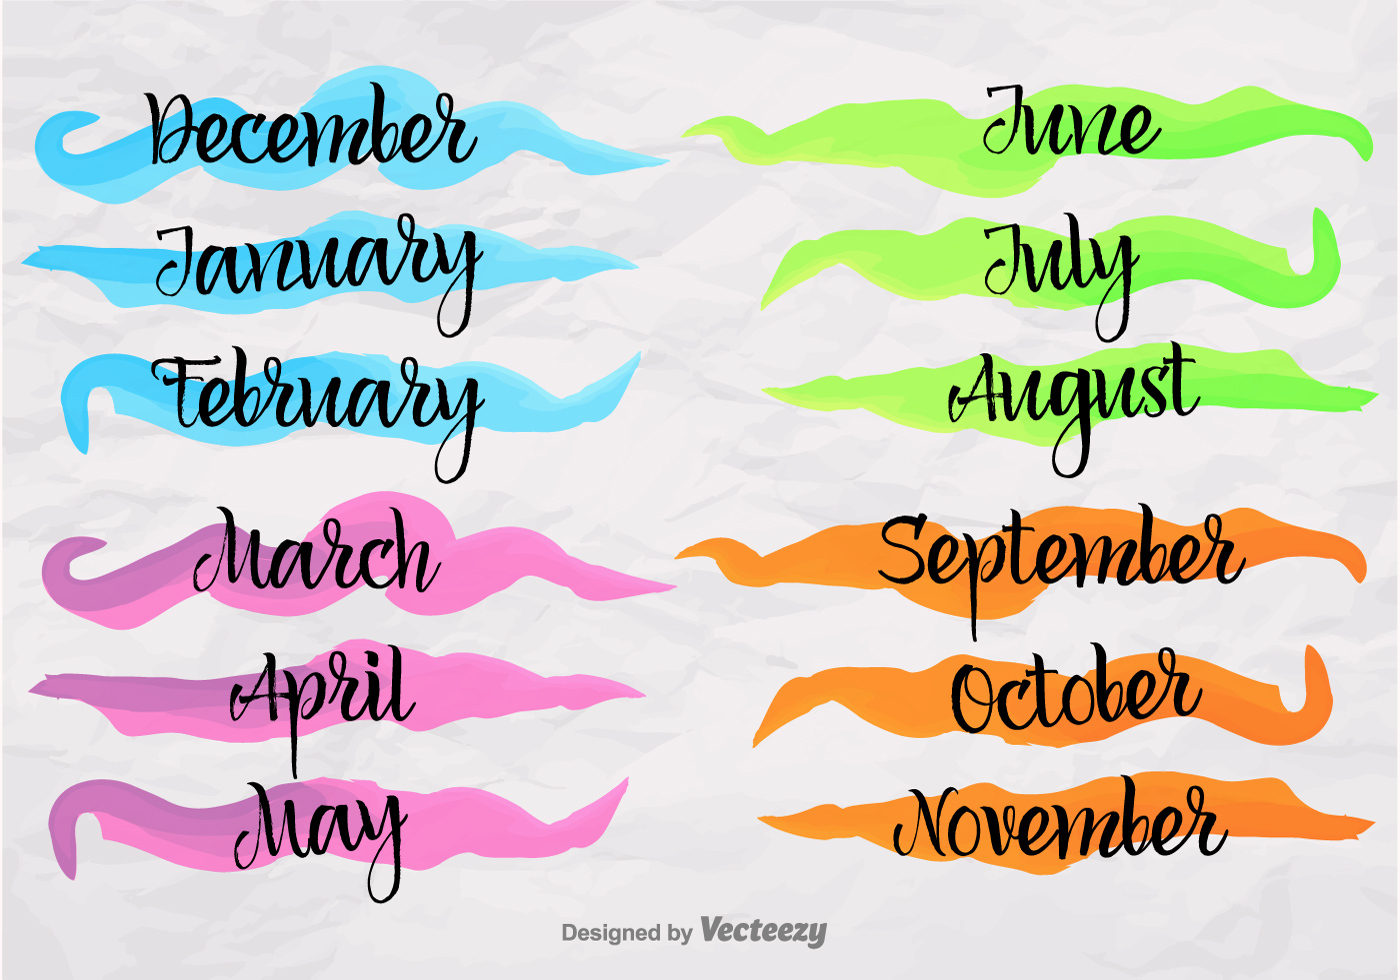 Months Of The Year Banners - Download Free Vector Art Months Of The Year Calendar Printables